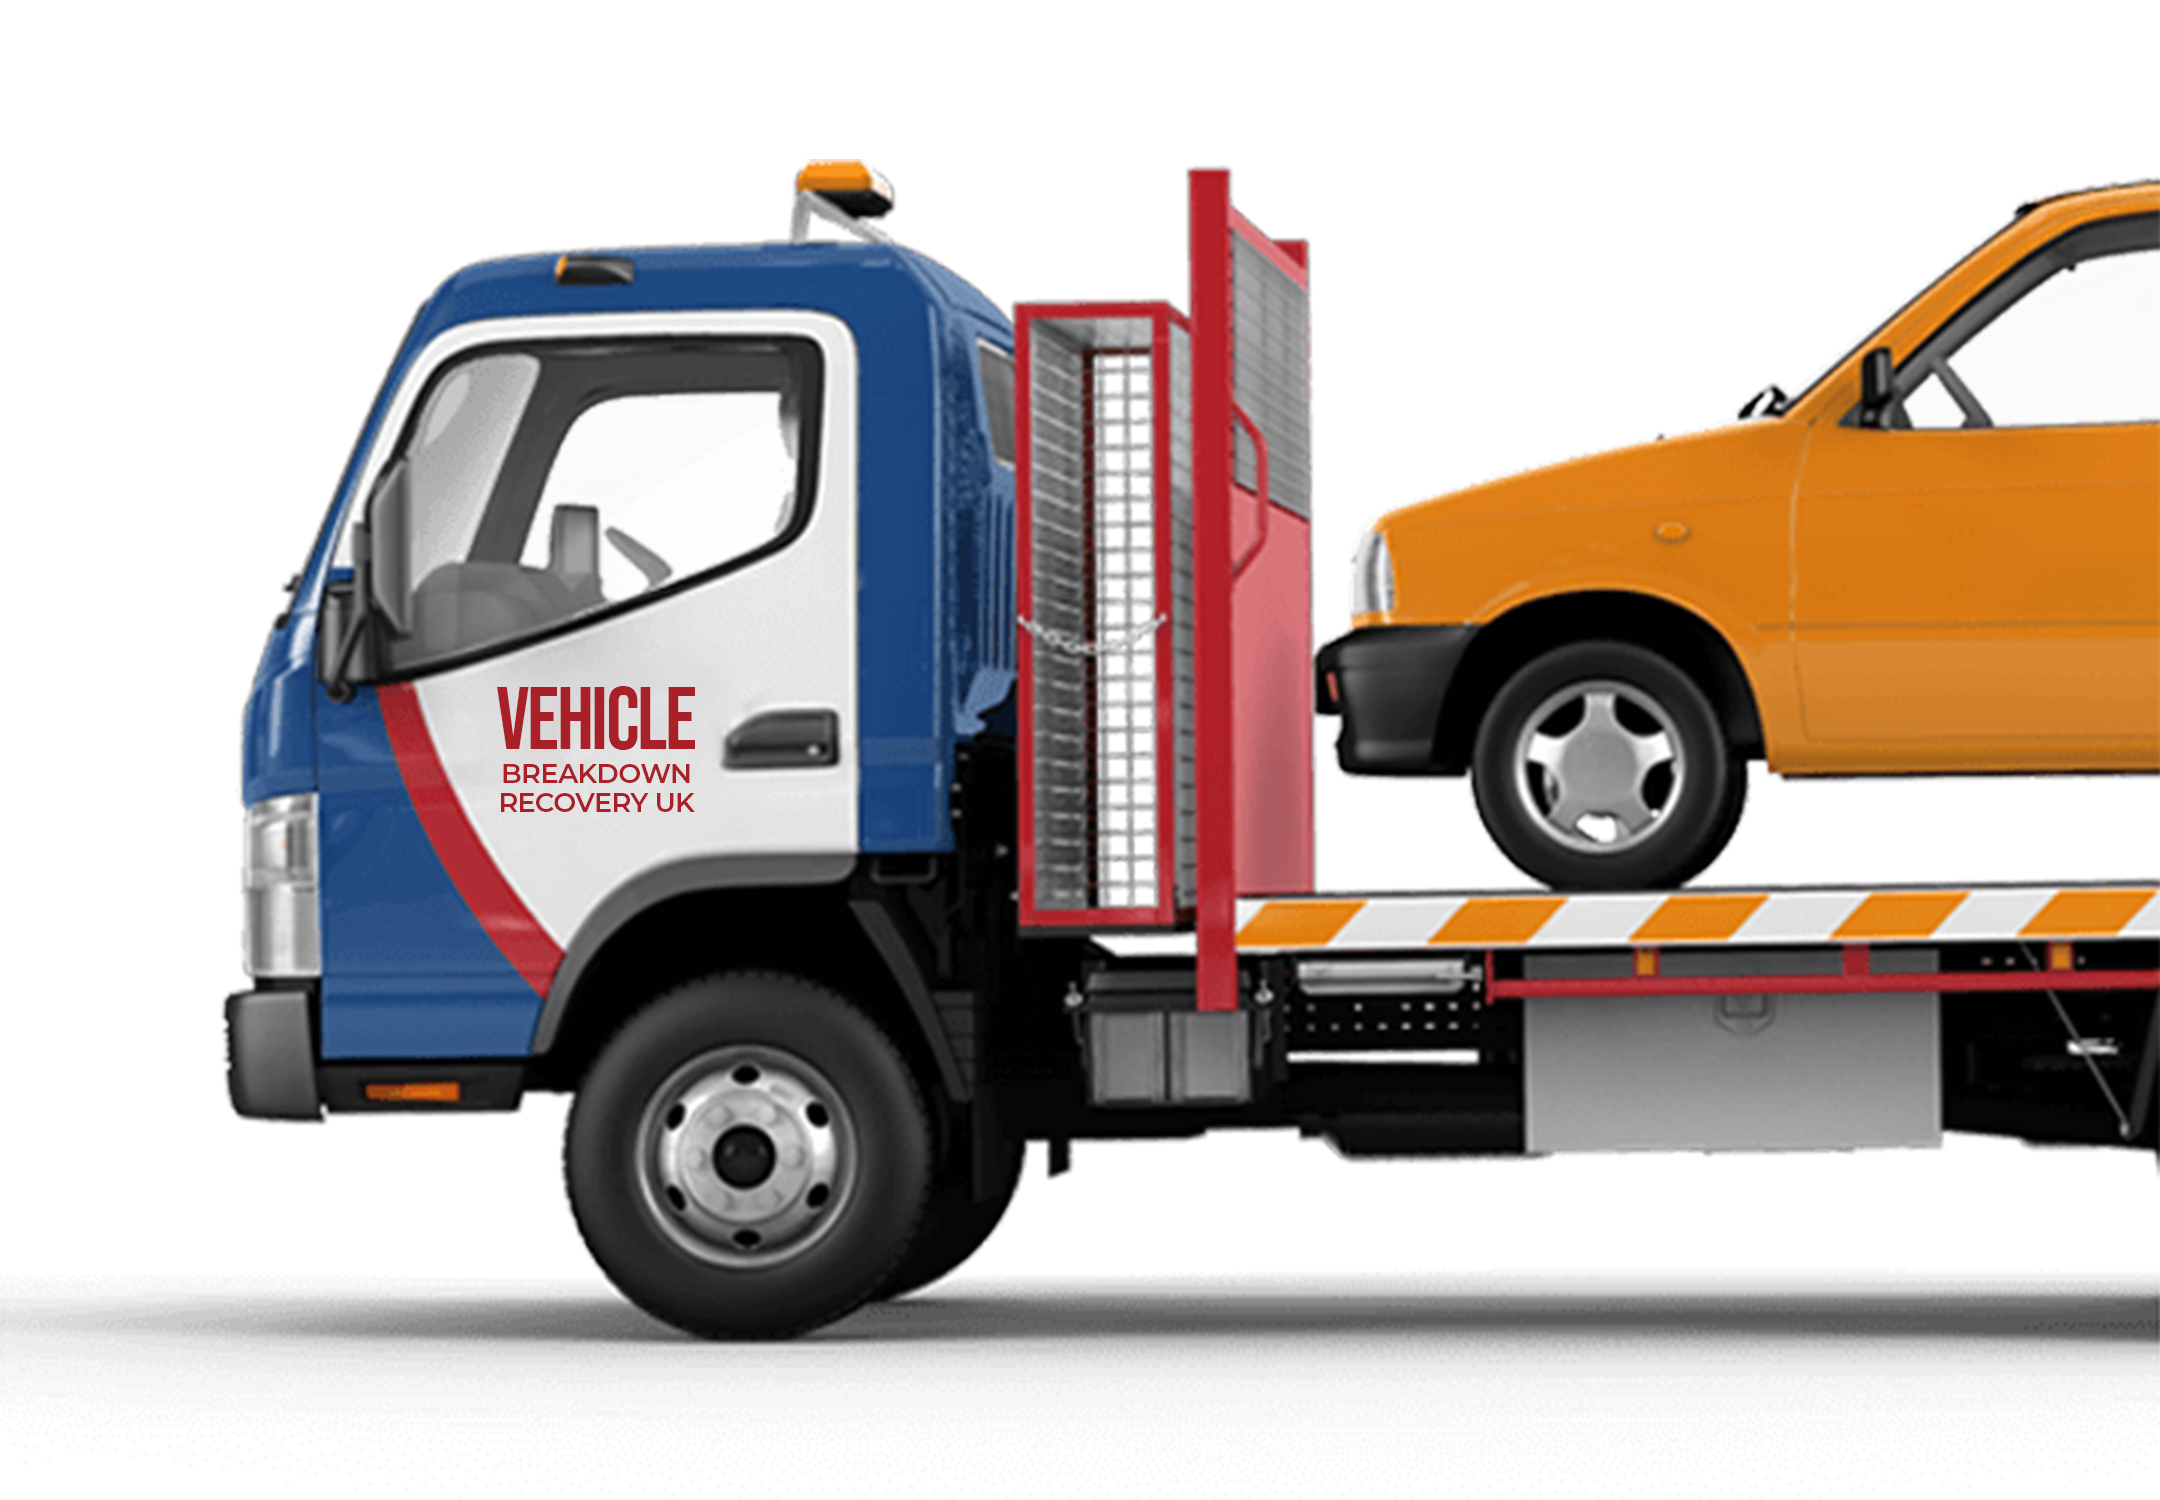 Car Breakdown recovery services in UK